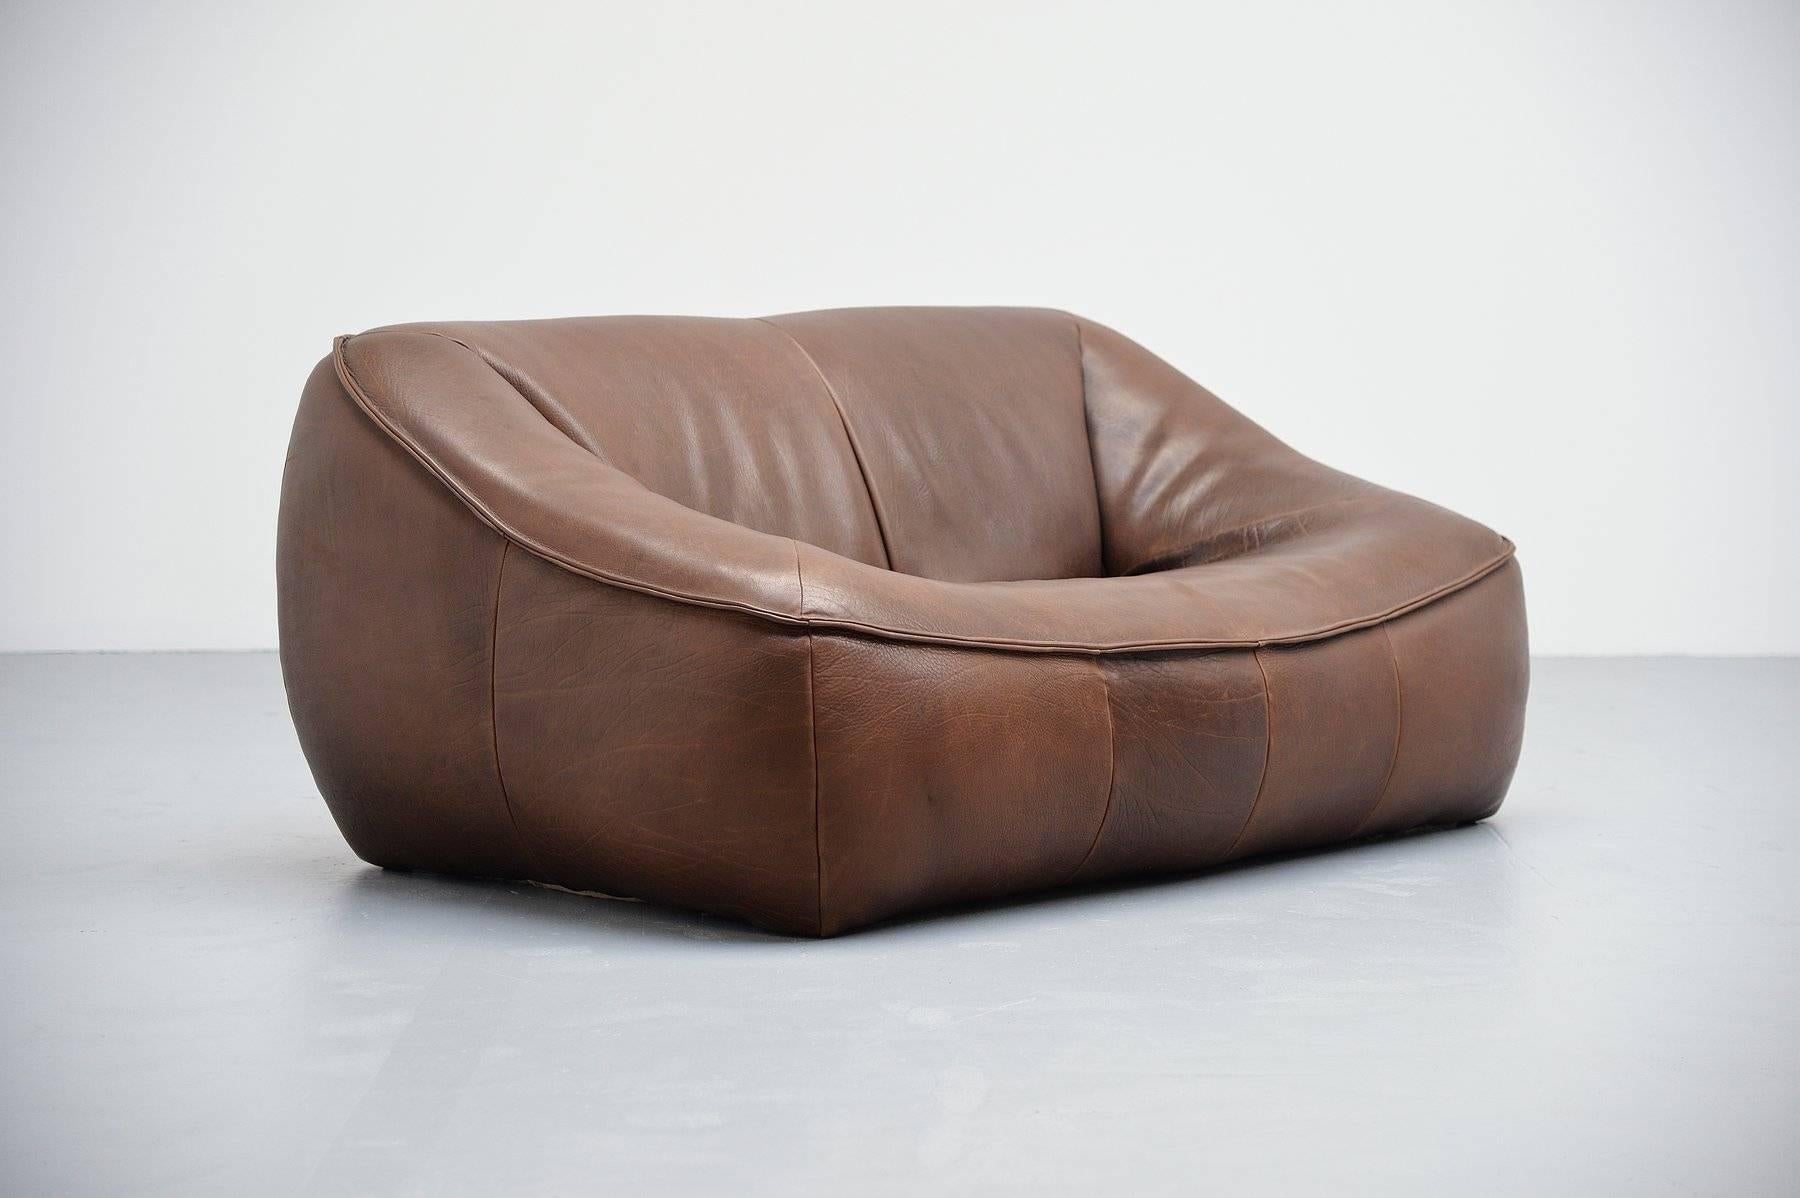 Quality leather sofa designed by Gerard Van den Berg for Montis, Holland, 1970. This sofa is made of super thick high quality buffalo leather. Very nice chocolate brown color and a nice patina from age and usage. Very nice shaped sofa and